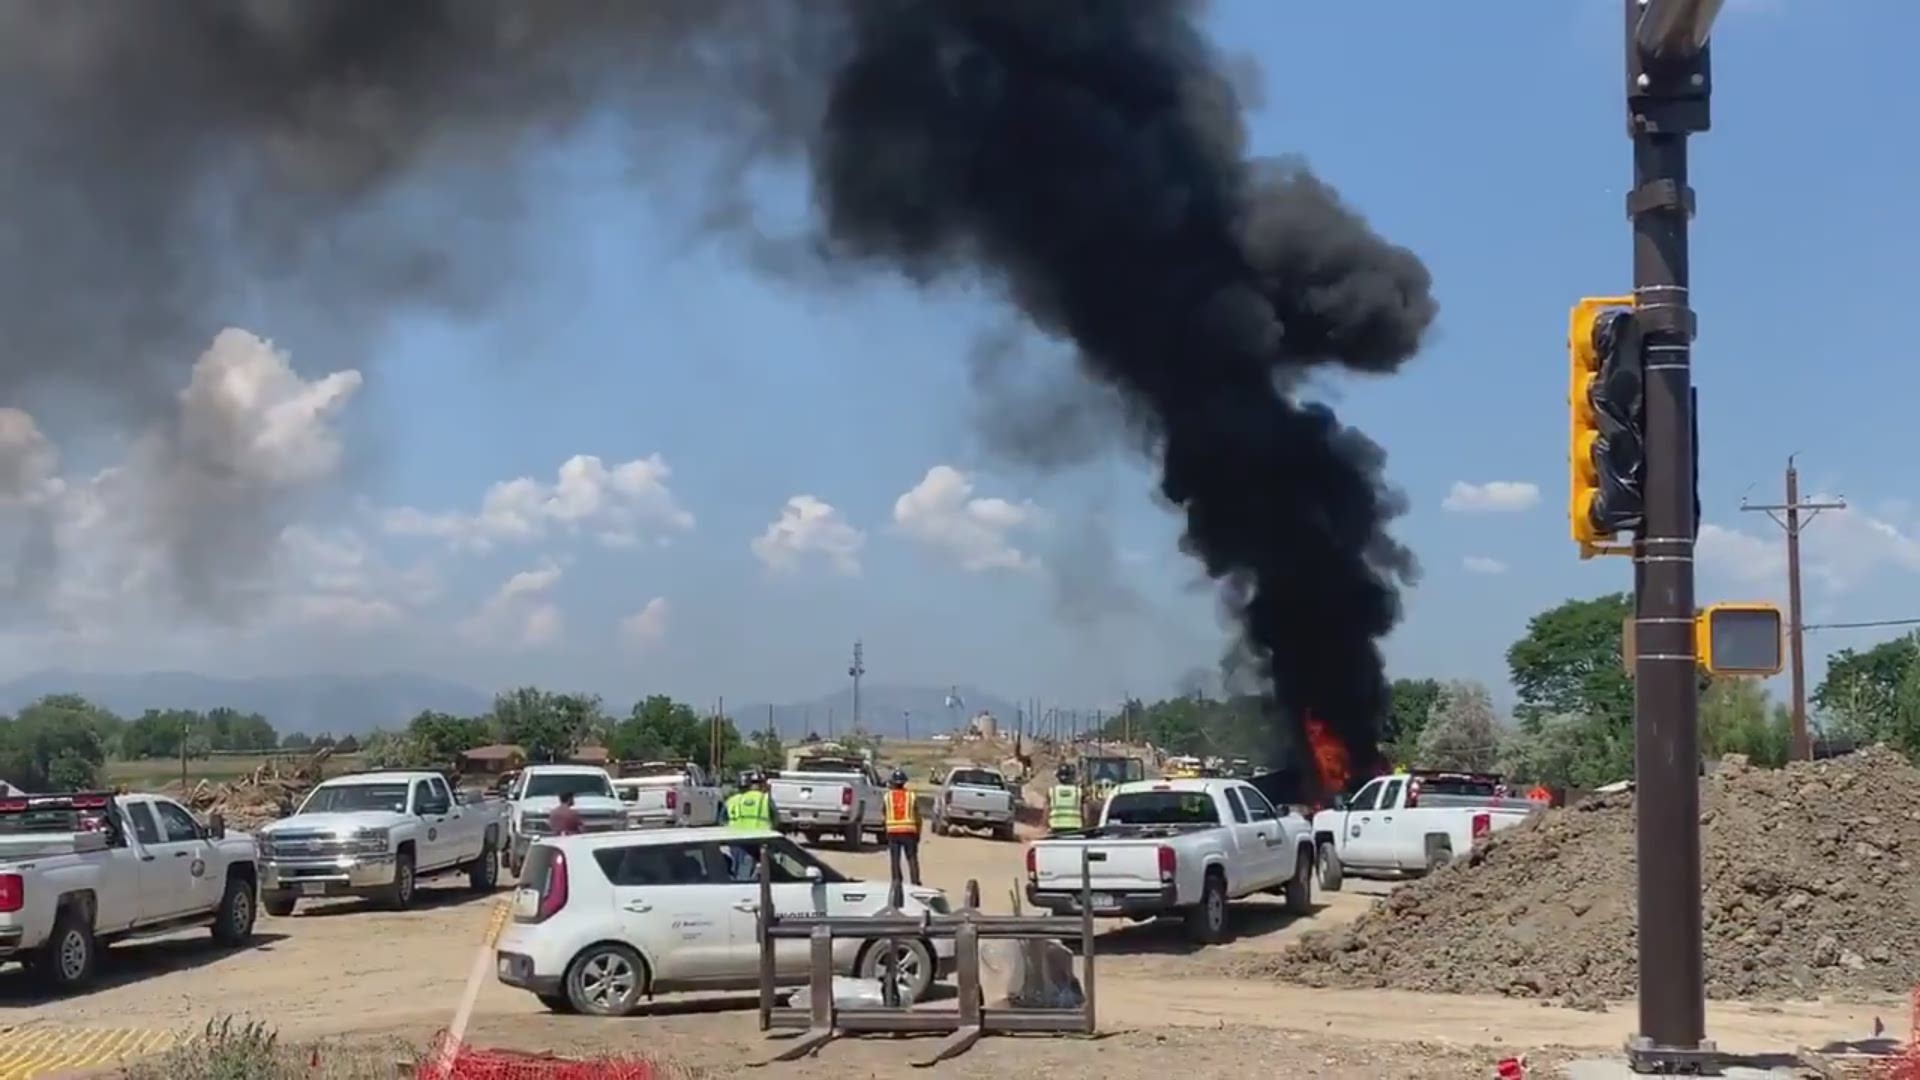 A semi and power lines are on fire following a crash at West 144th Avenue & Sheridan Boulevard in Broomfield.